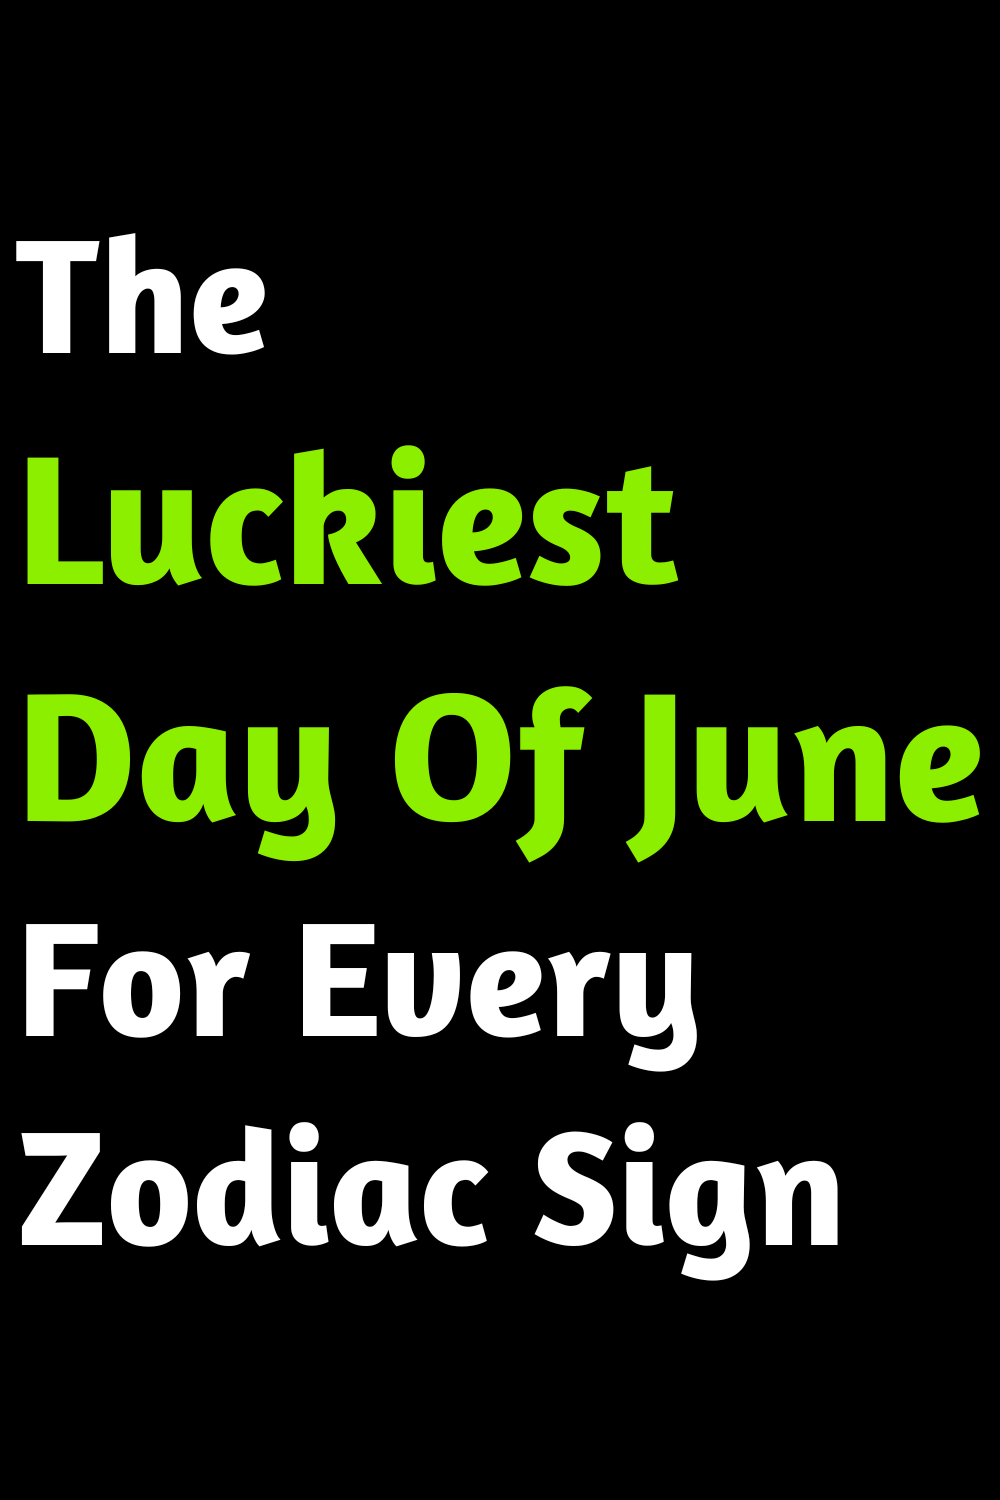 The Luckiest Day Of June For Every Zodiac Sign